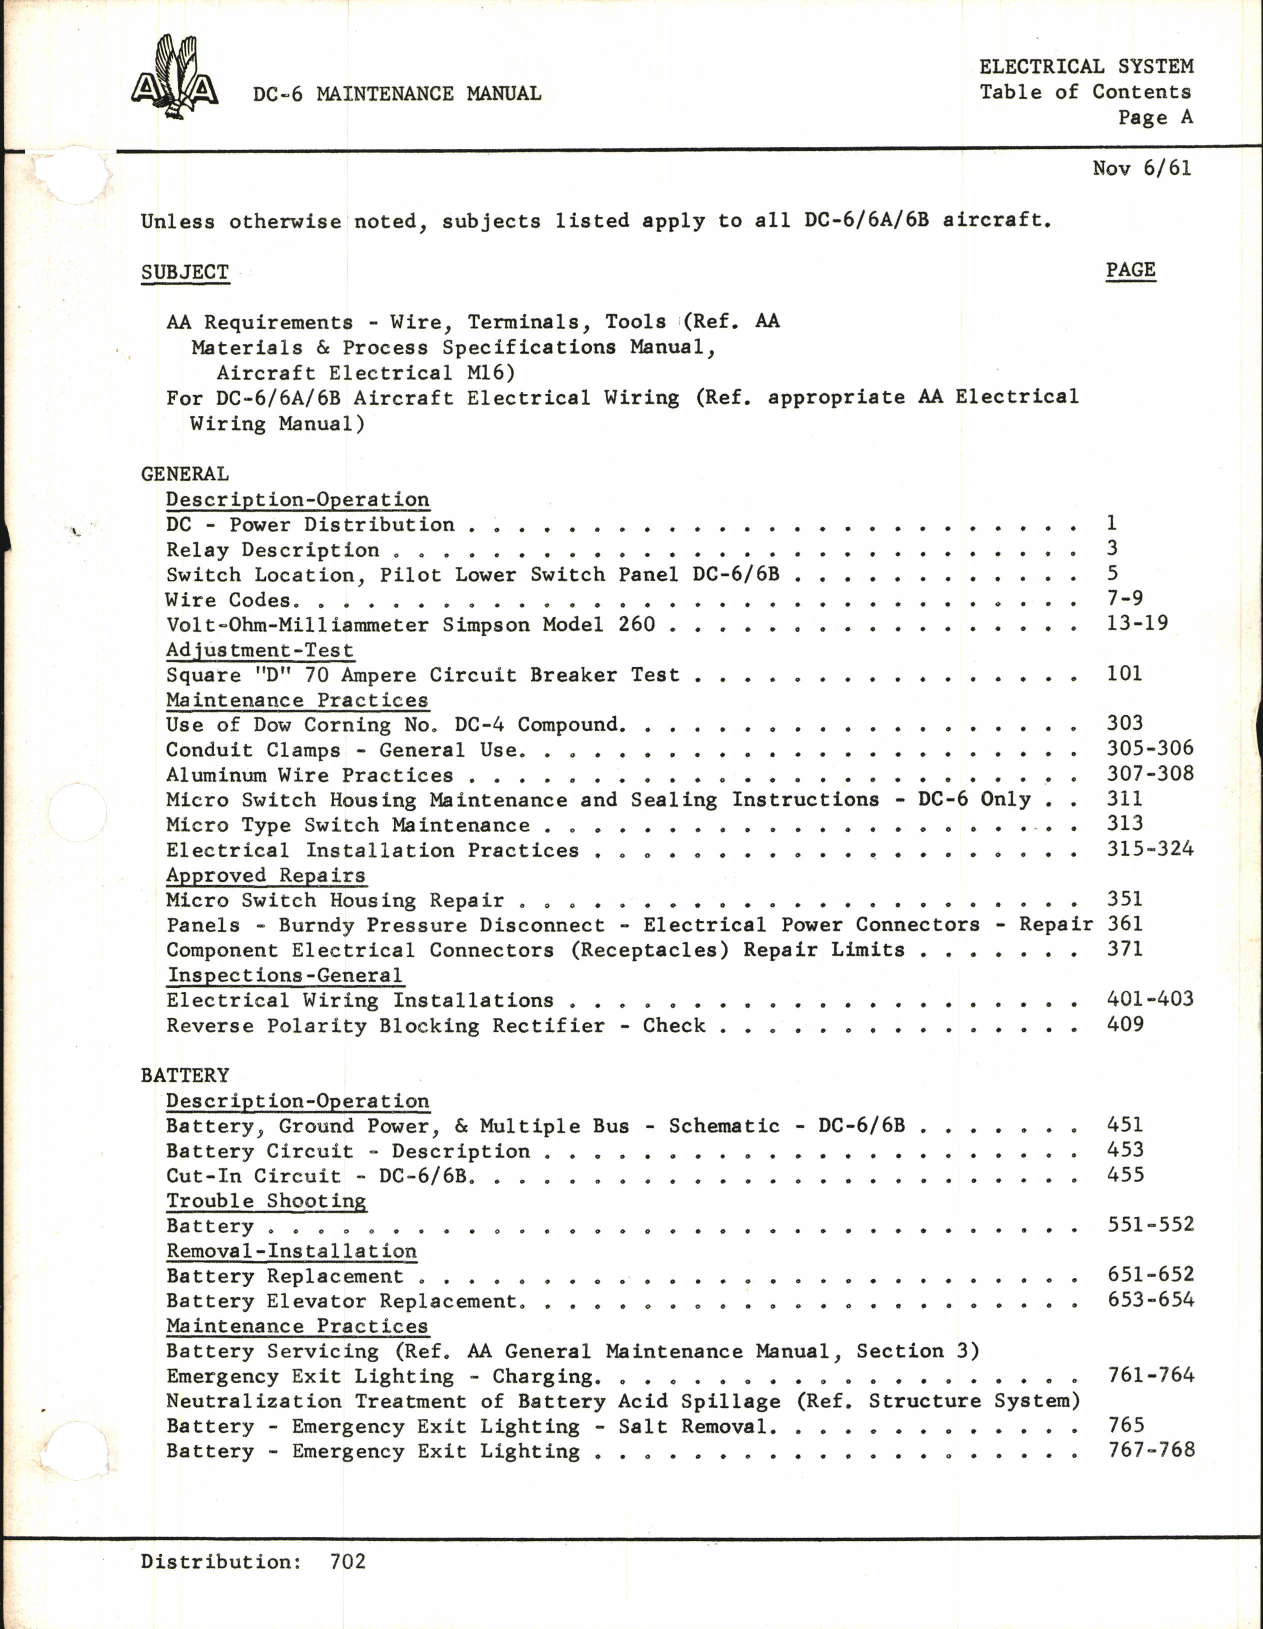 Sample page 1 from AirCorps Library document: DC-6 Maintenance Manual